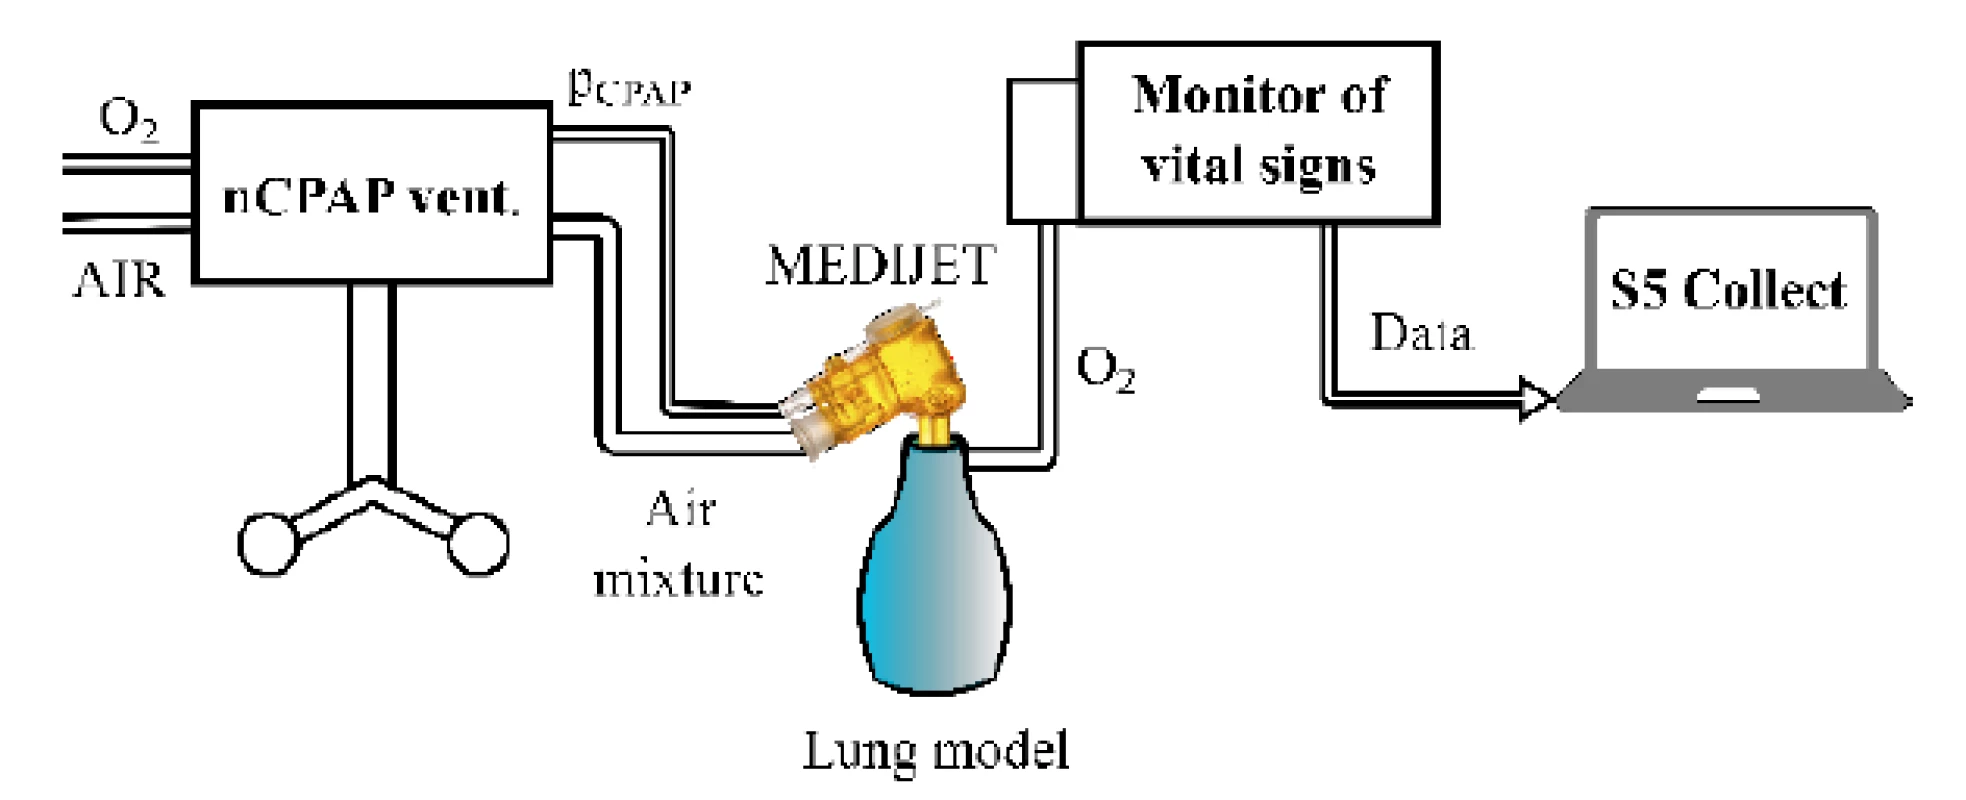 The experimental setup with the nCPAP ventilator, nostril system, monitor of vital signs and physical model of the lungs for measurement of the time delay of oxygen delivery into the airways after the change of the set oxygen fraction.